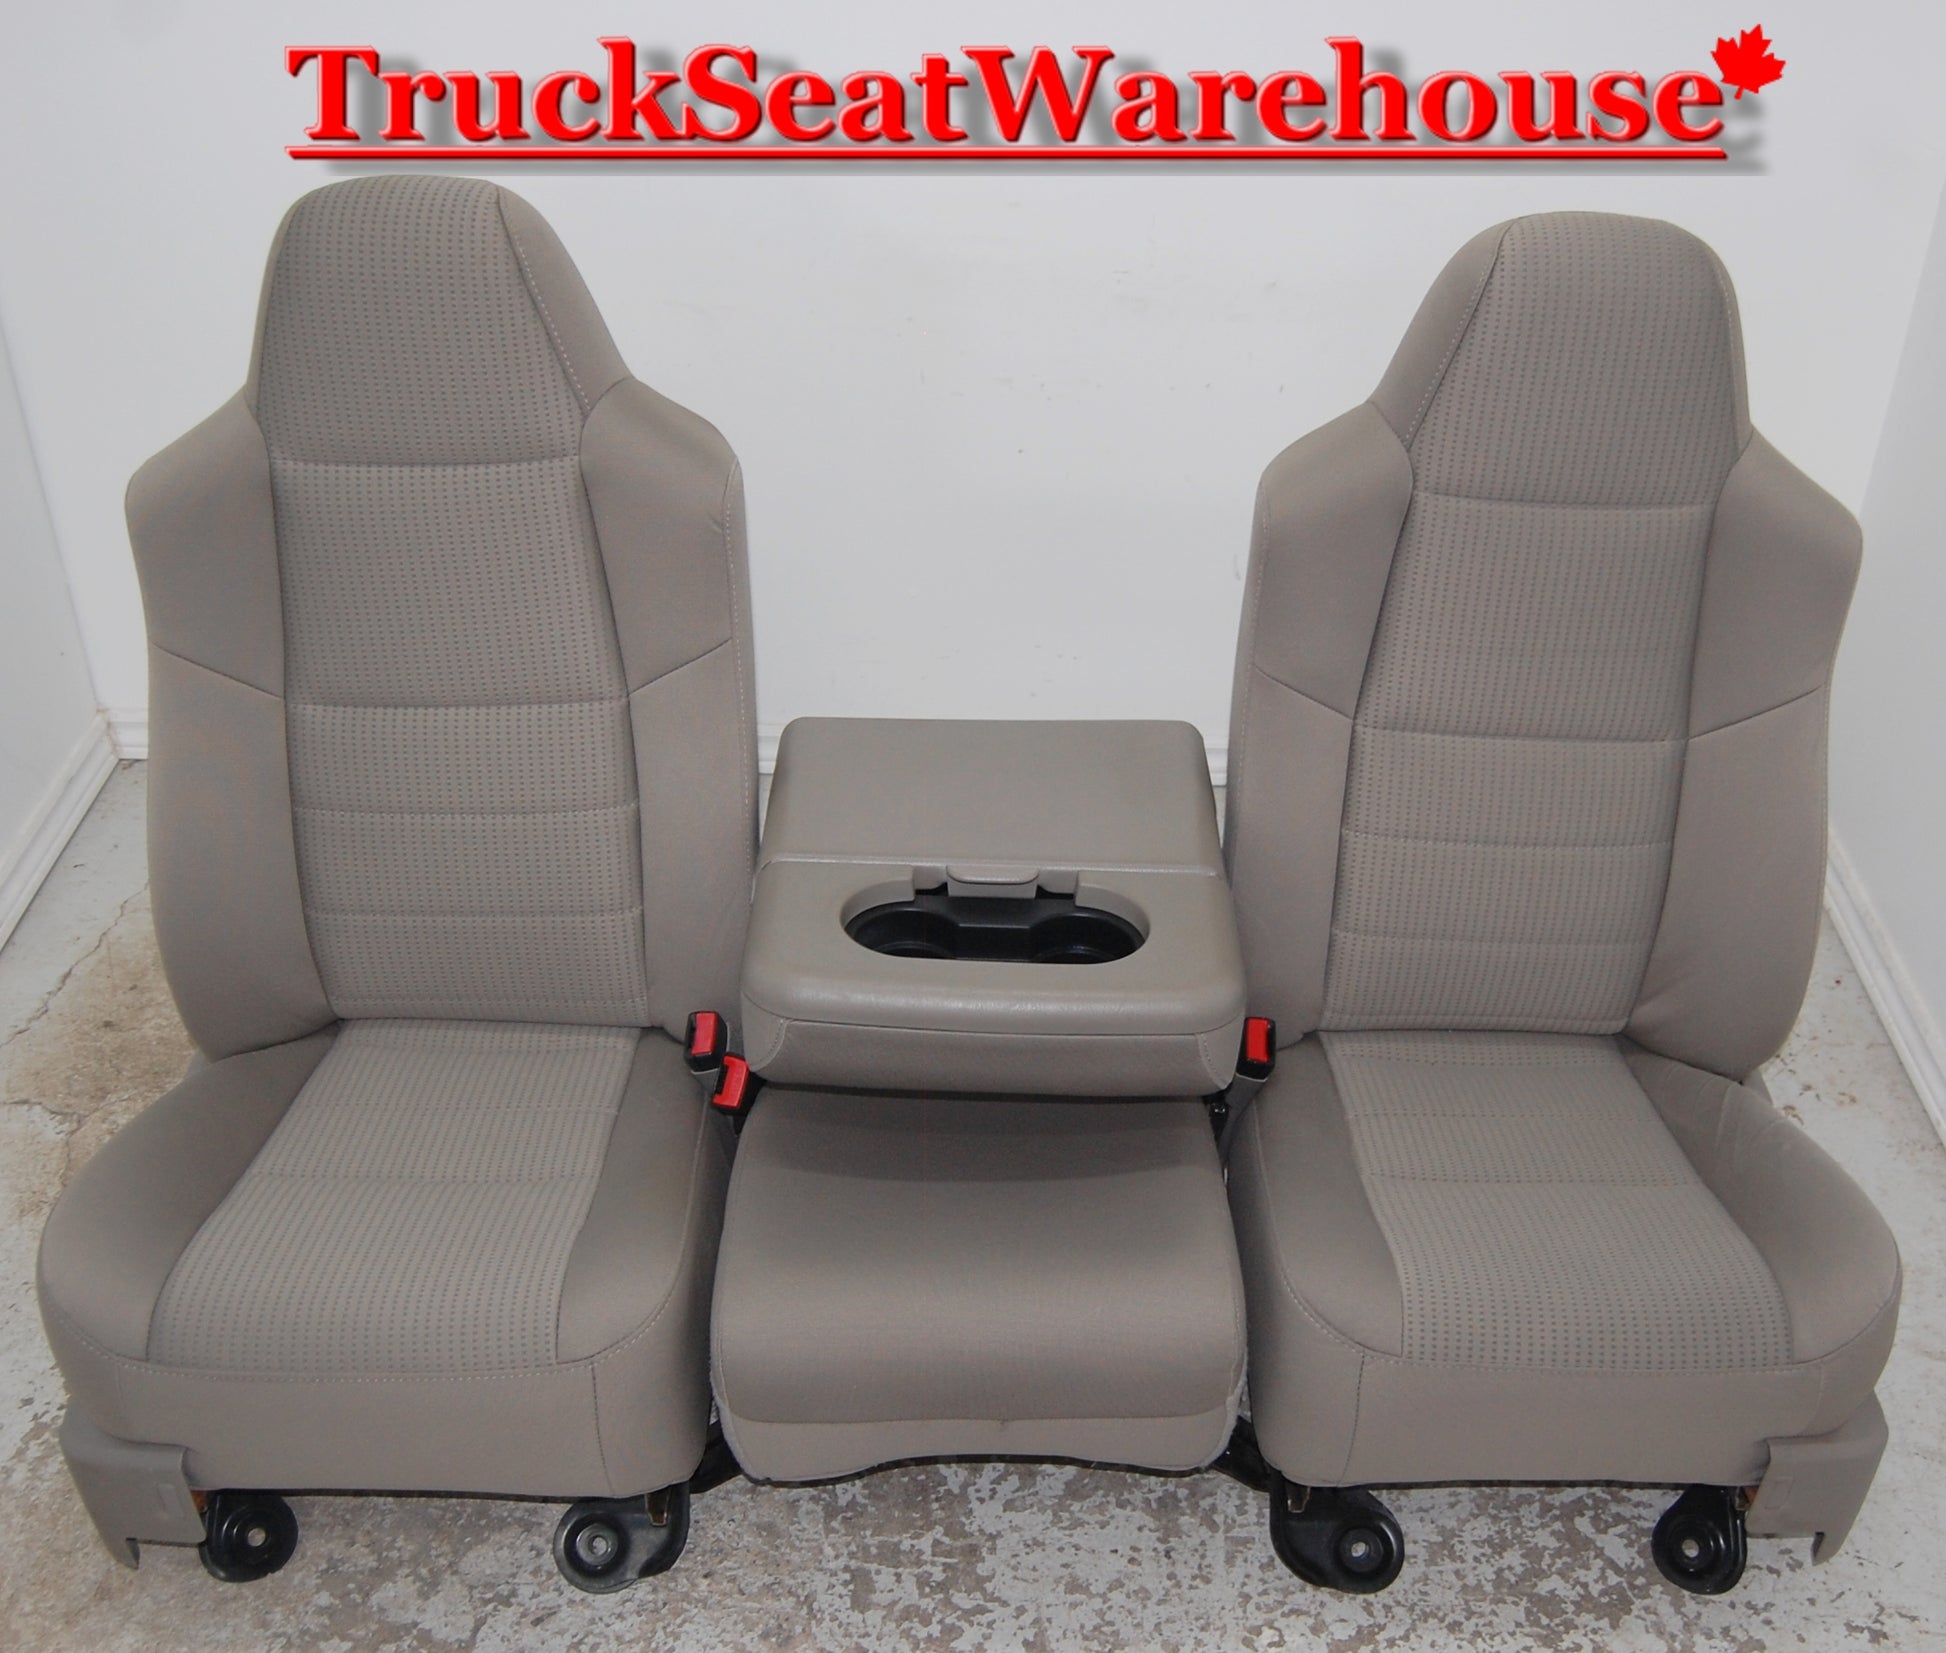 Cloth power front seats and center fold down seat console from a 2008 Ford F250 Superduty Truck . F350 F450 F550